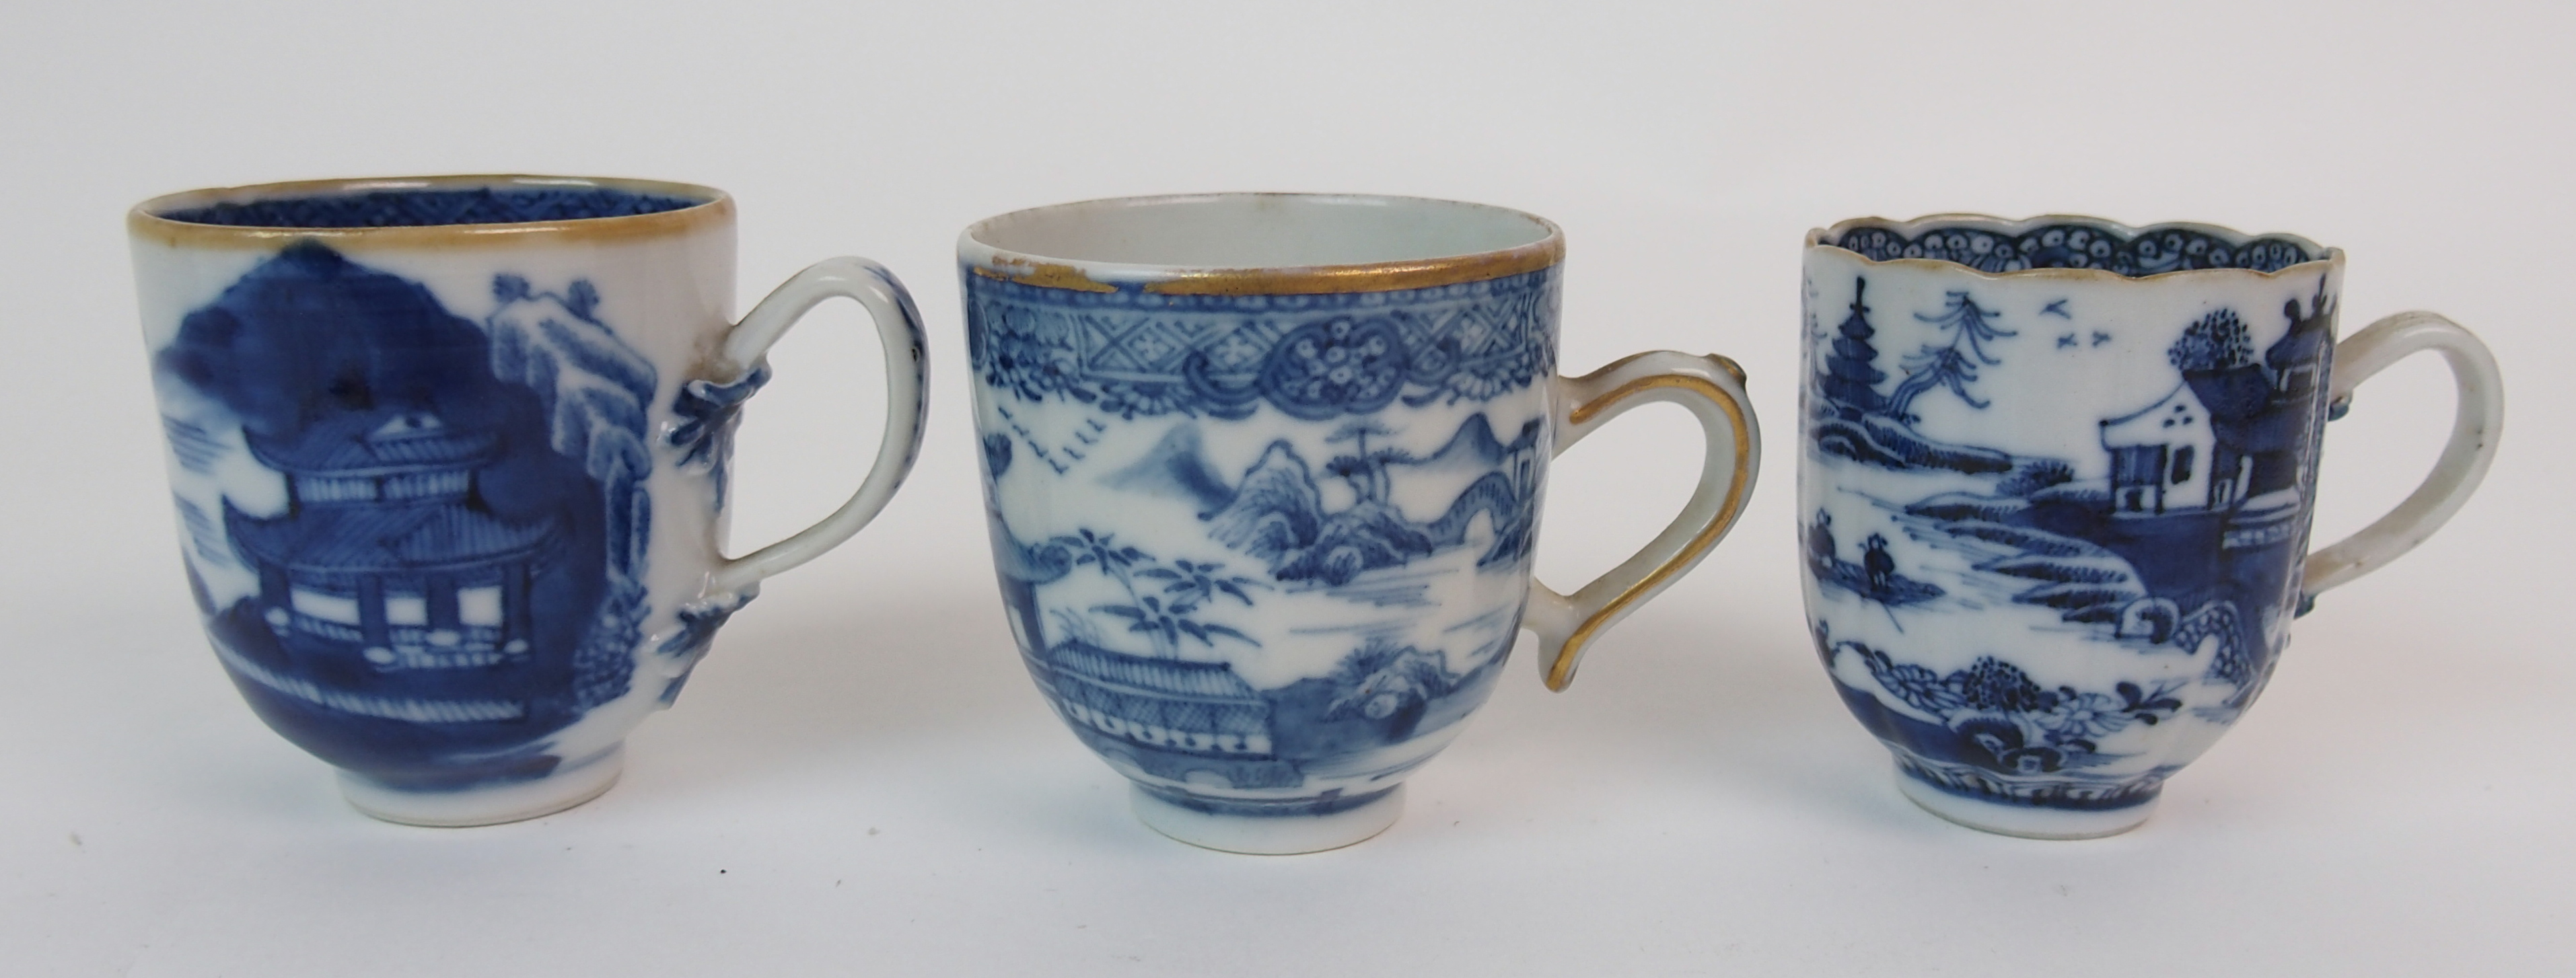 A group of twenty-three Chinese export teacups painted with typical landscapes and gilt rims, - Image 6 of 10